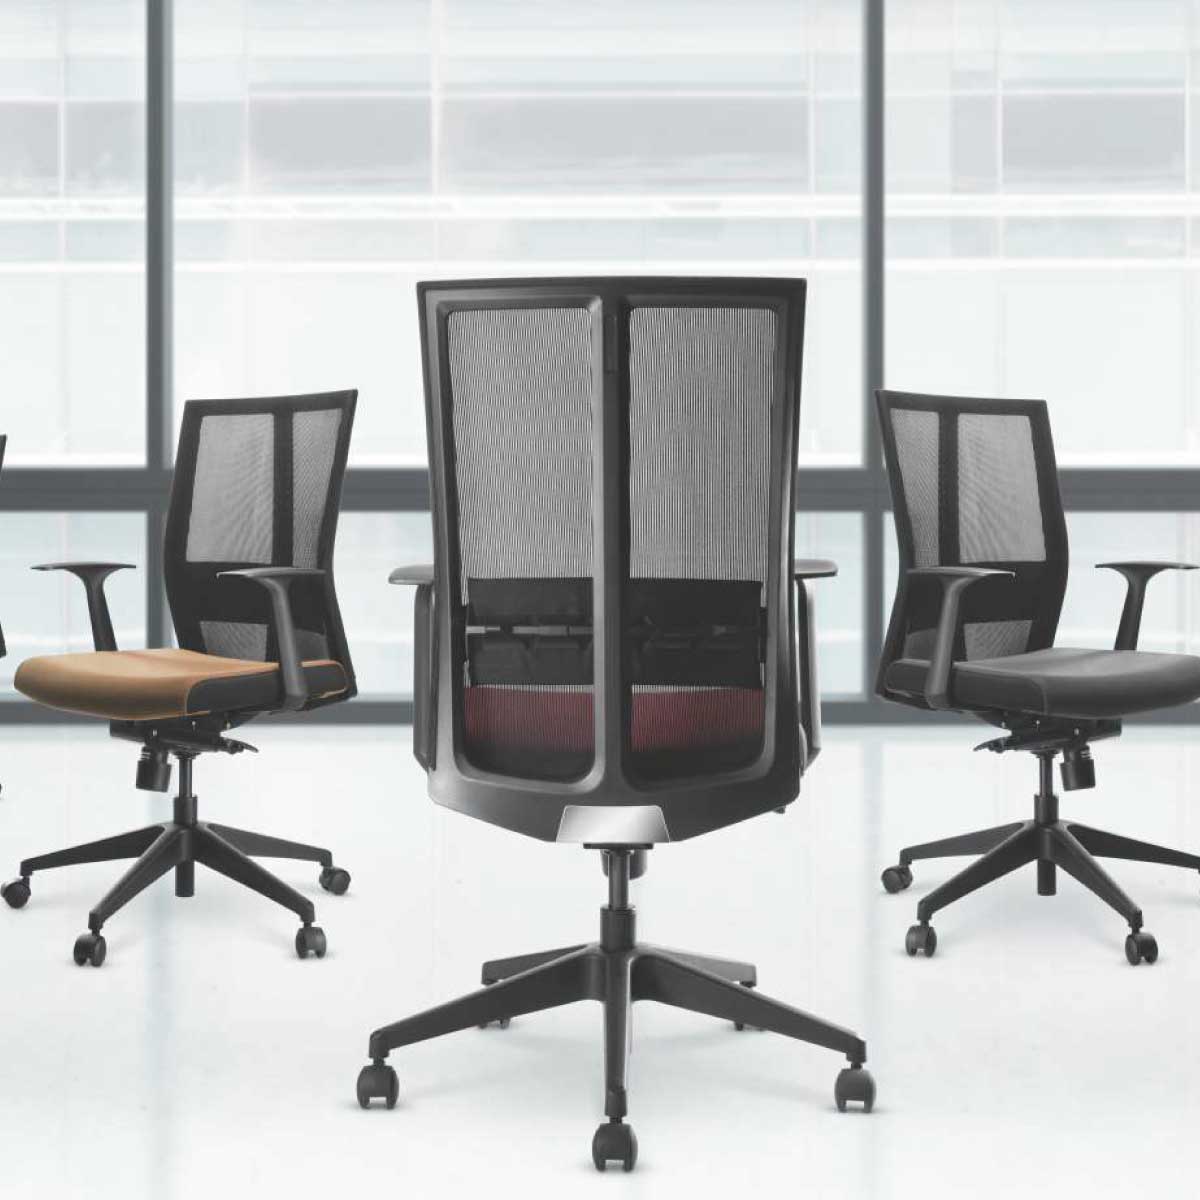 Visitor Chair Manufacturers, Suppliers in Rohini Sector 11